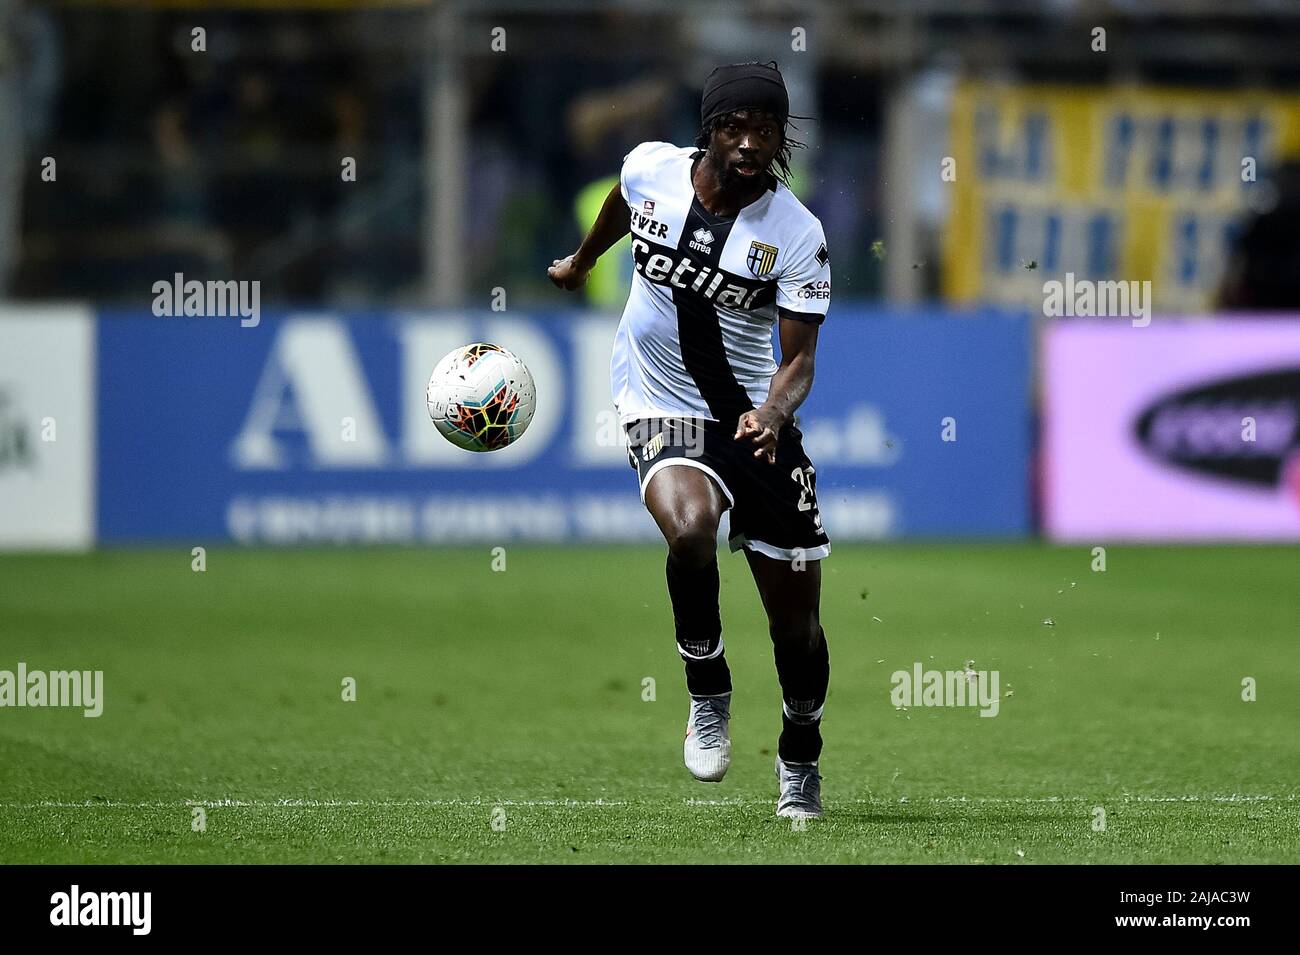 Parma, Italy. 30 September, 2019: Gervinho of Parma Calcio in action during the Serie A football match between Parma Calcio and Torino FC. Parma Calcio won 3-2 over Torino FC. Credit: Nicolò Campo/Alamy Live News Stock Photo